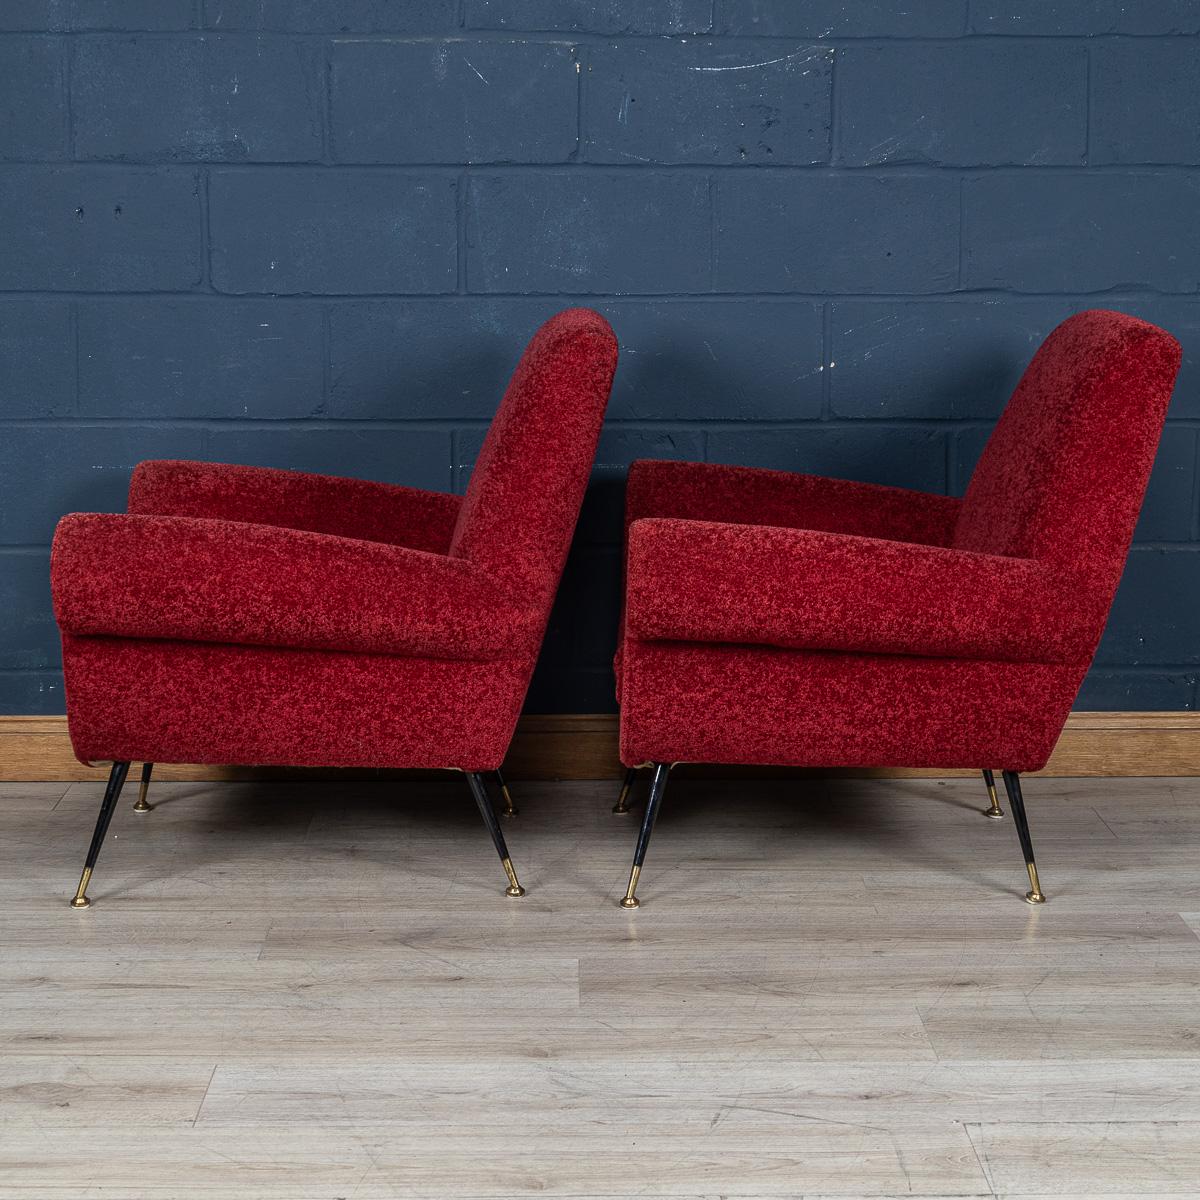 20th Century Italian Pair Of Armchairs By Gigi Radice For Minotti, c.1960 In Good Condition For Sale In Royal Tunbridge Wells, Kent